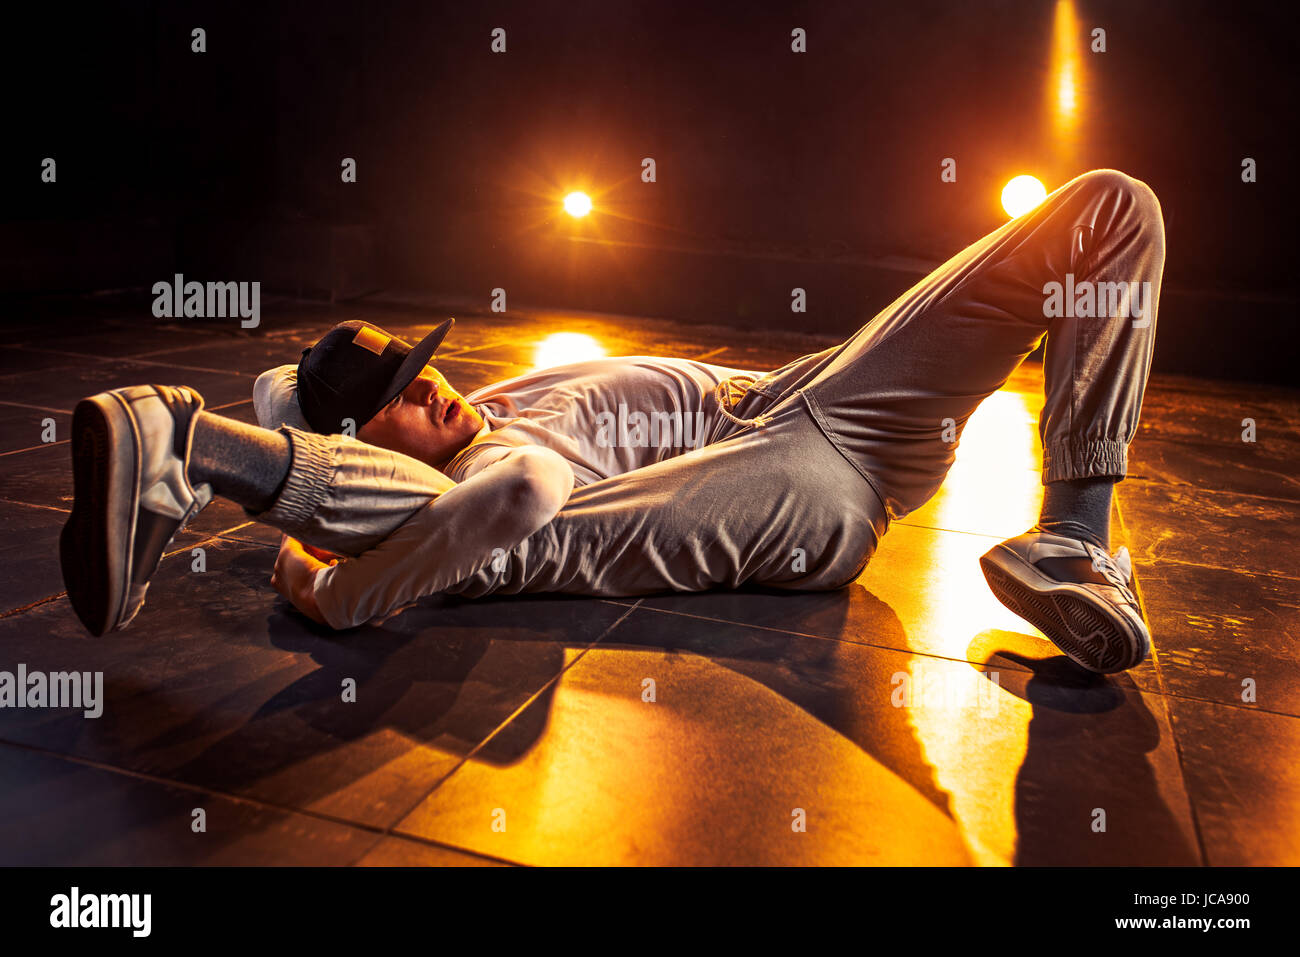 Young man break dancing in club with red lights. Vibrant contrast colors. Stock Photo